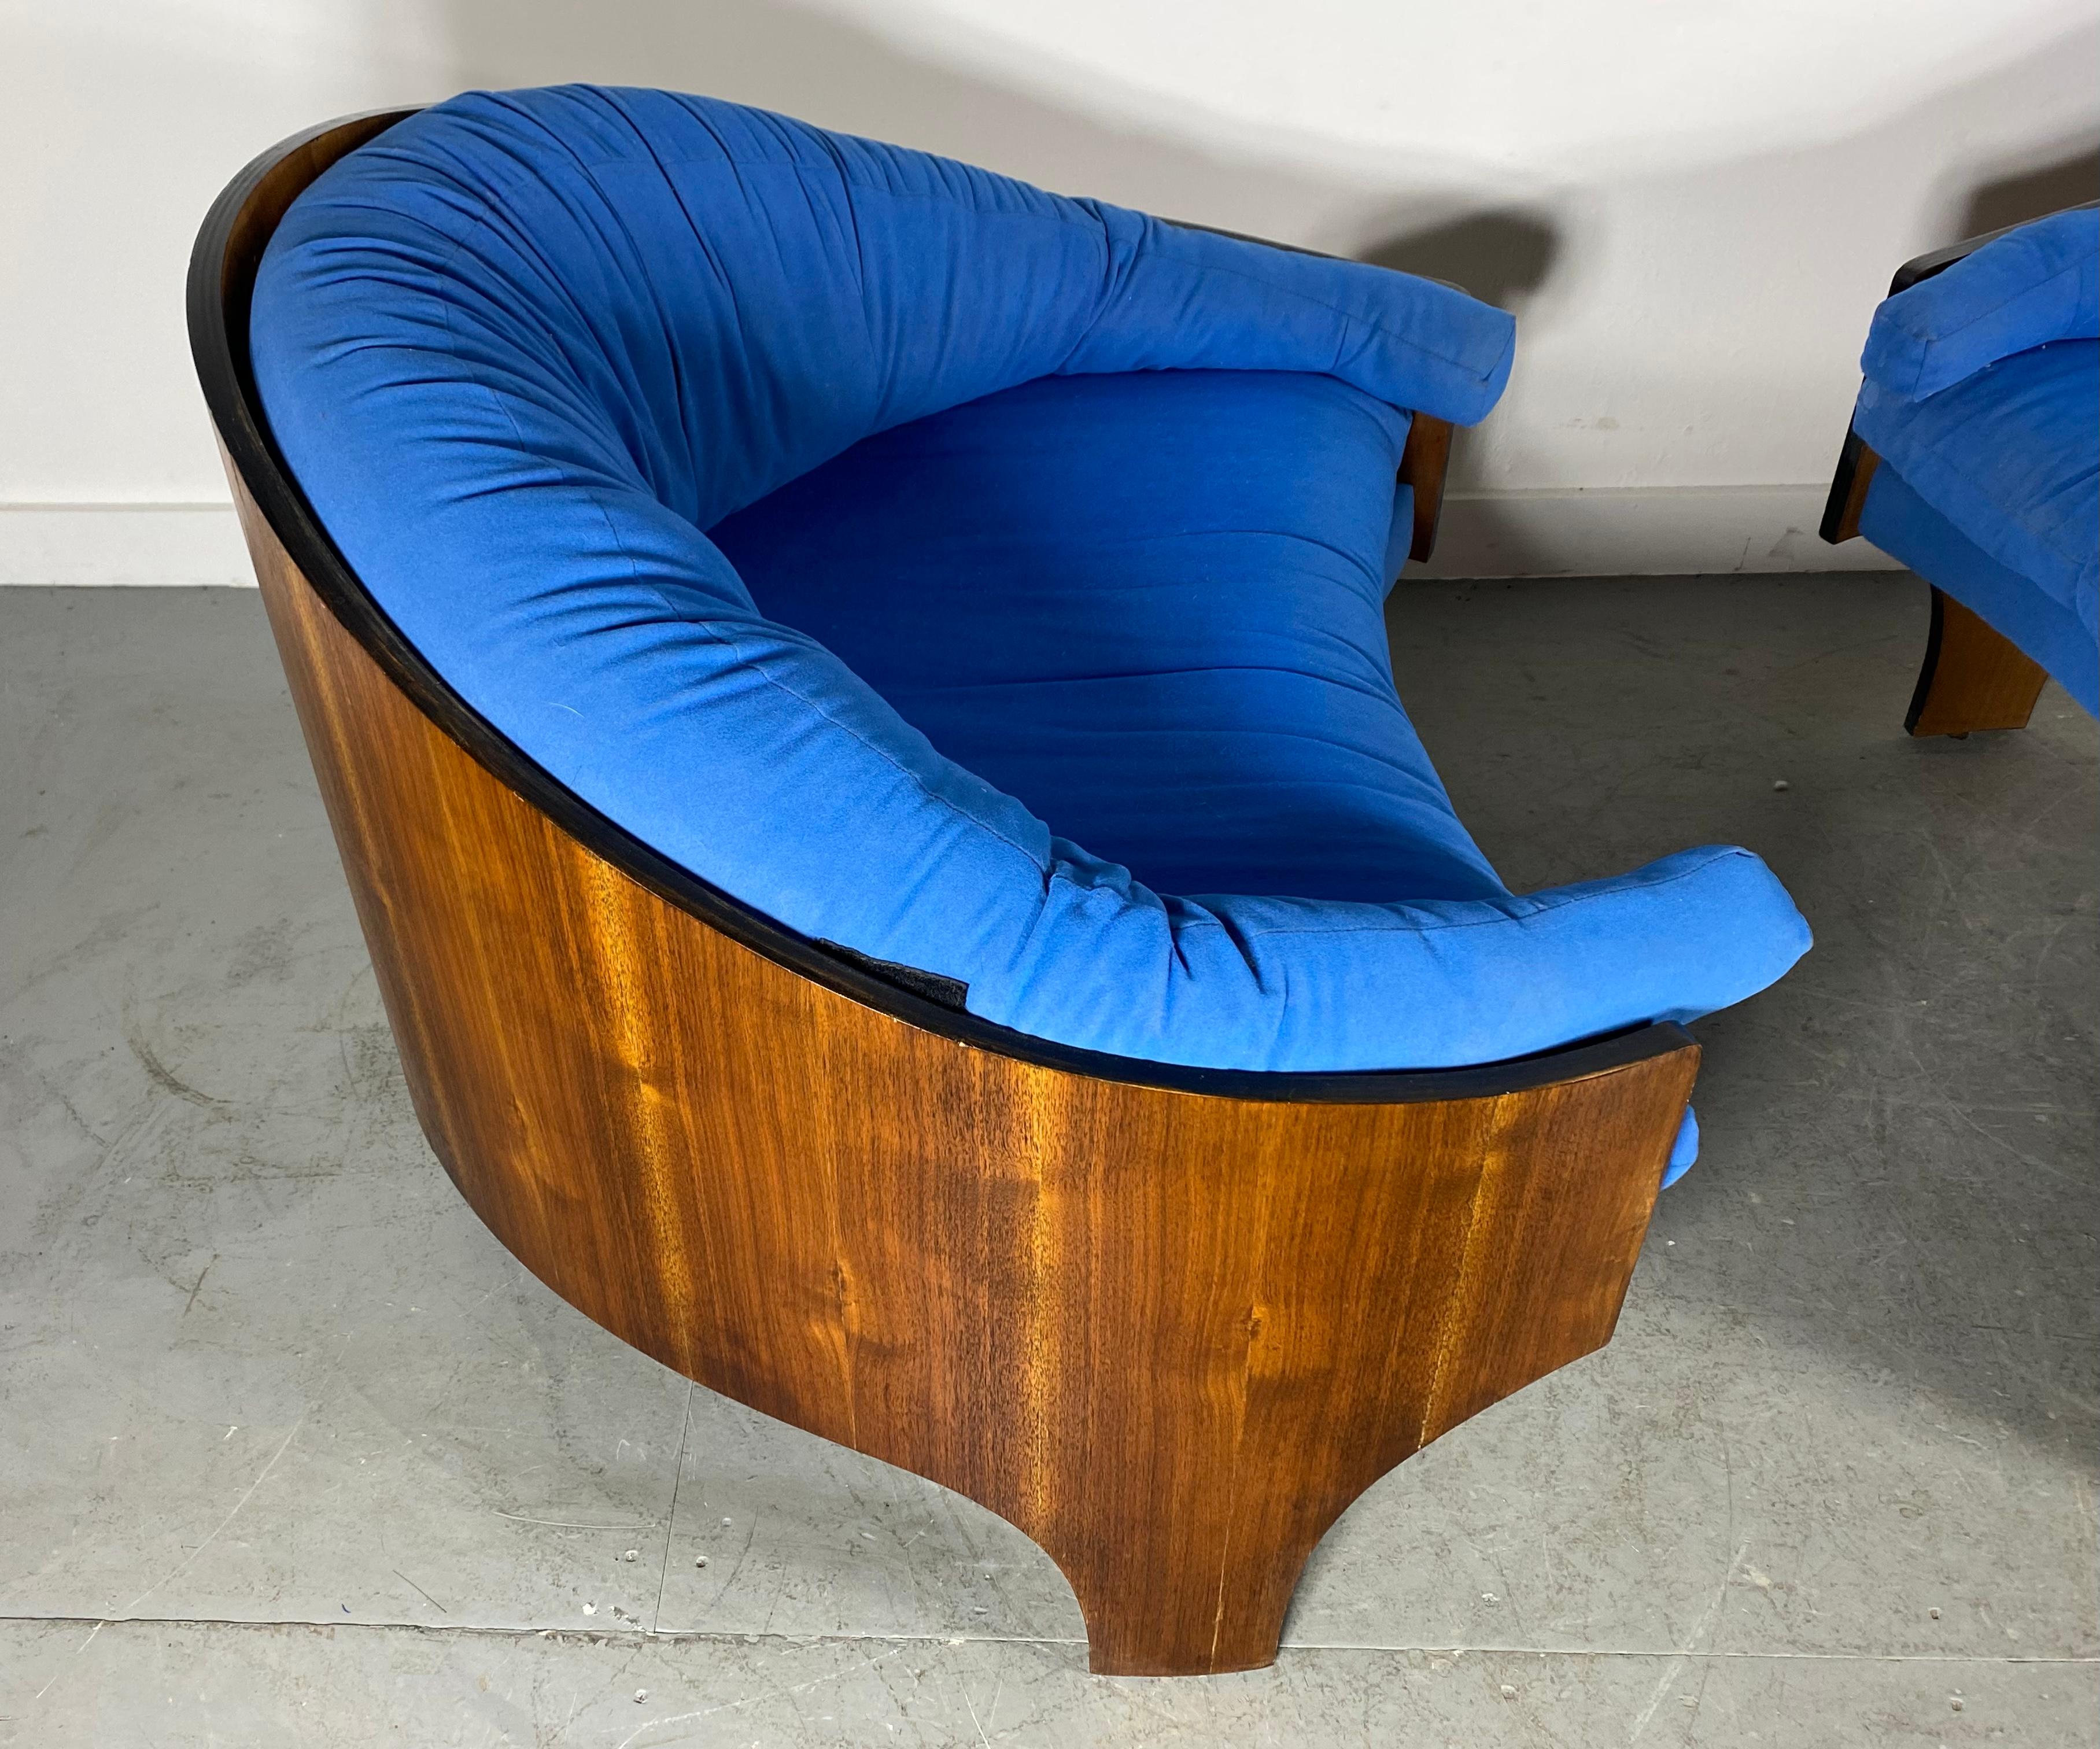 Henry Glass Intimate Island Lounge Chairs Stunning Moulded Walnut For Sale 4